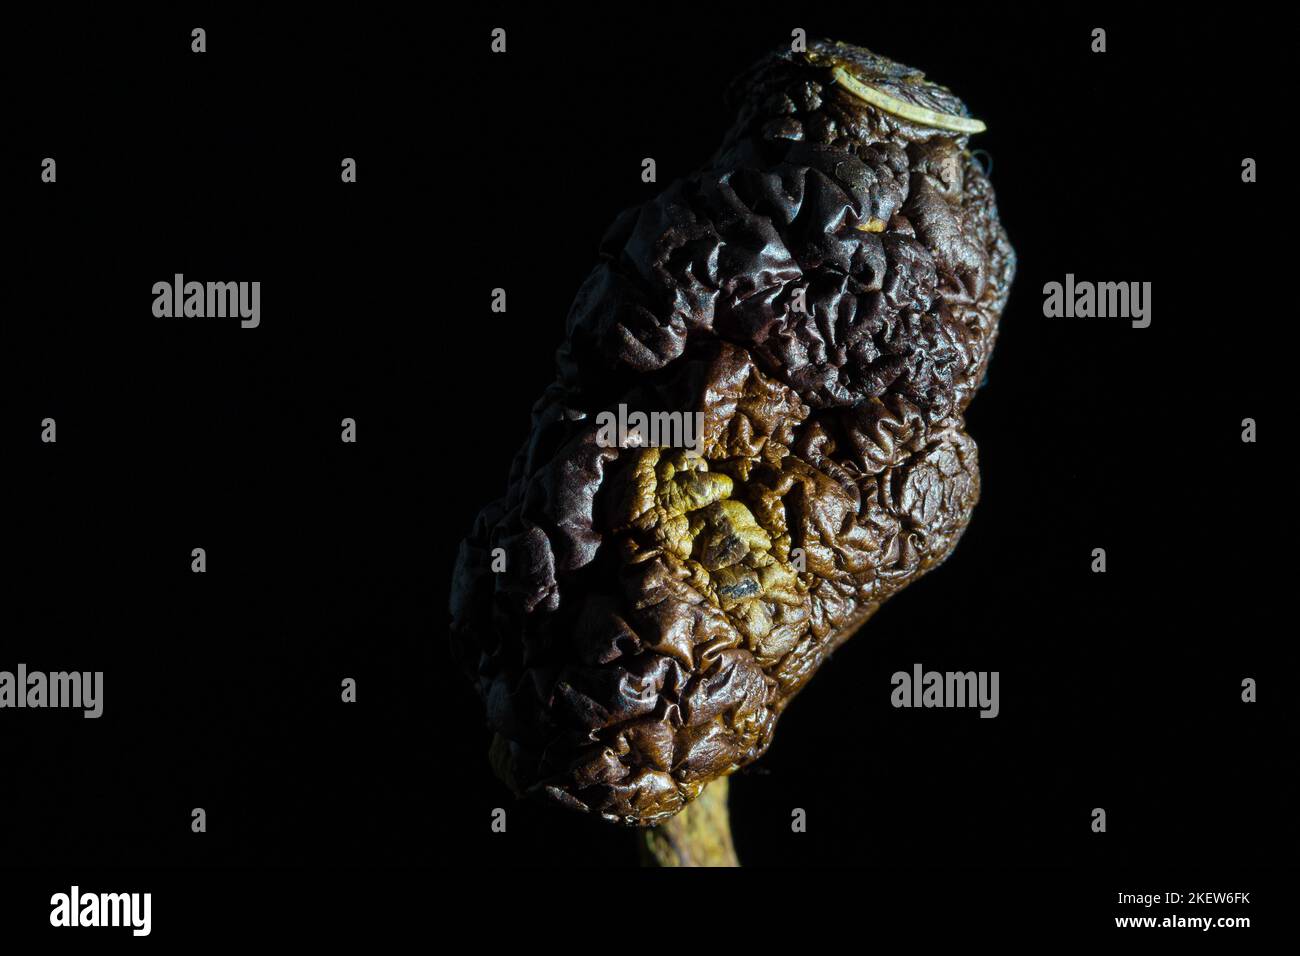 Aging process, an old shriveled fungus. Aging is a natural process that is unavoidable. Stock Photo